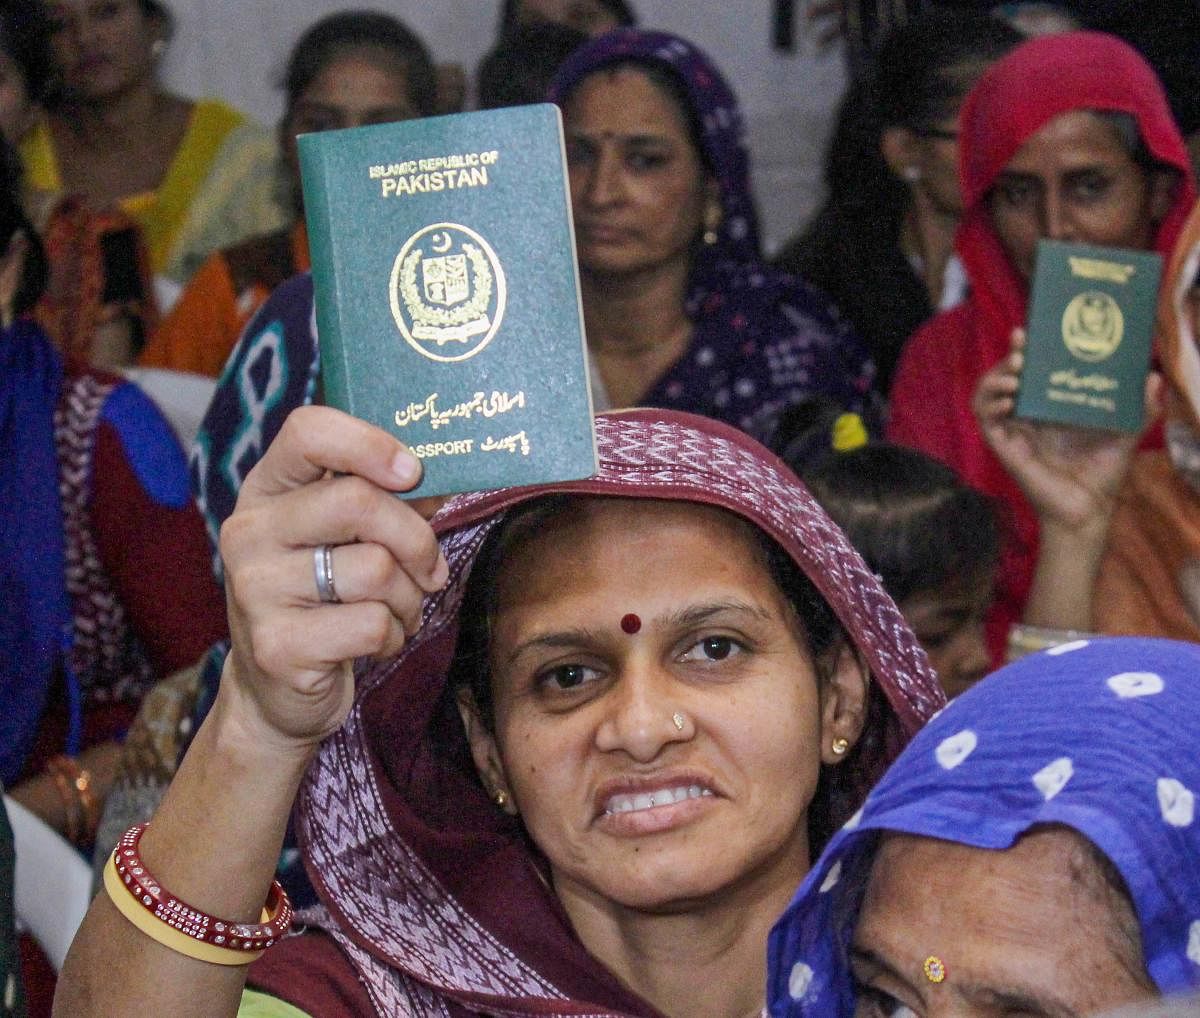 Ahmedabad: Hindu refugees who migrated from Sindh province of Pakistan display their passports as they support the Citizenship Amendment Act in Ahmadabad. The Gujarat Legislative Assembly on Friday passed a resolution congratulating the Prime Minister and the Union Home Minister for securing the passage of the Citizenship (Amendment) Act. (PTI Photo)